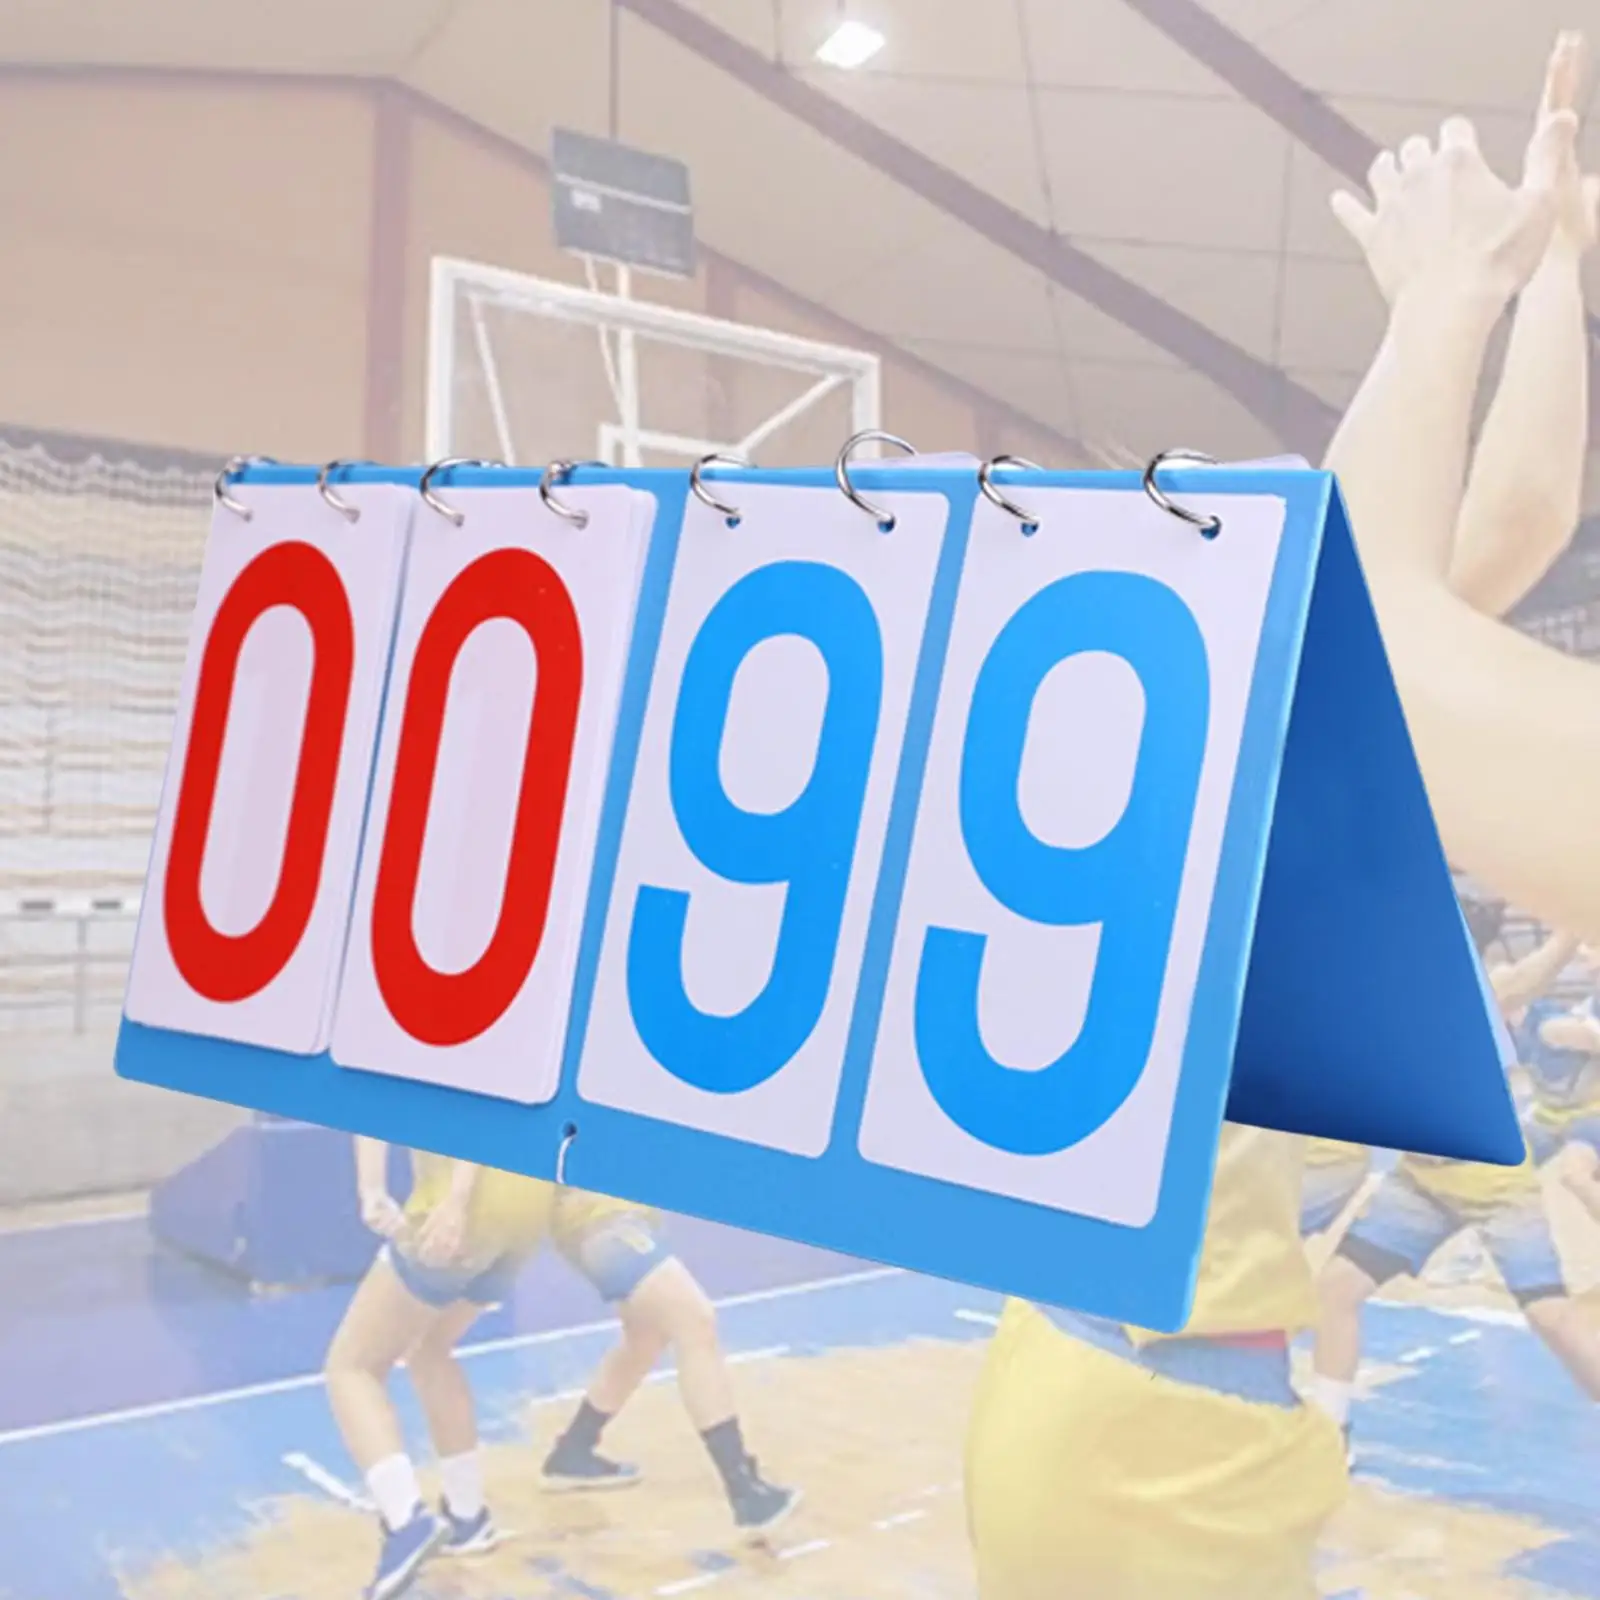 Table Top Scoreboard Collapsible Waterproof Score Turn Easily Turn Premium for Volleyball Football Badminton Basketball Tennis